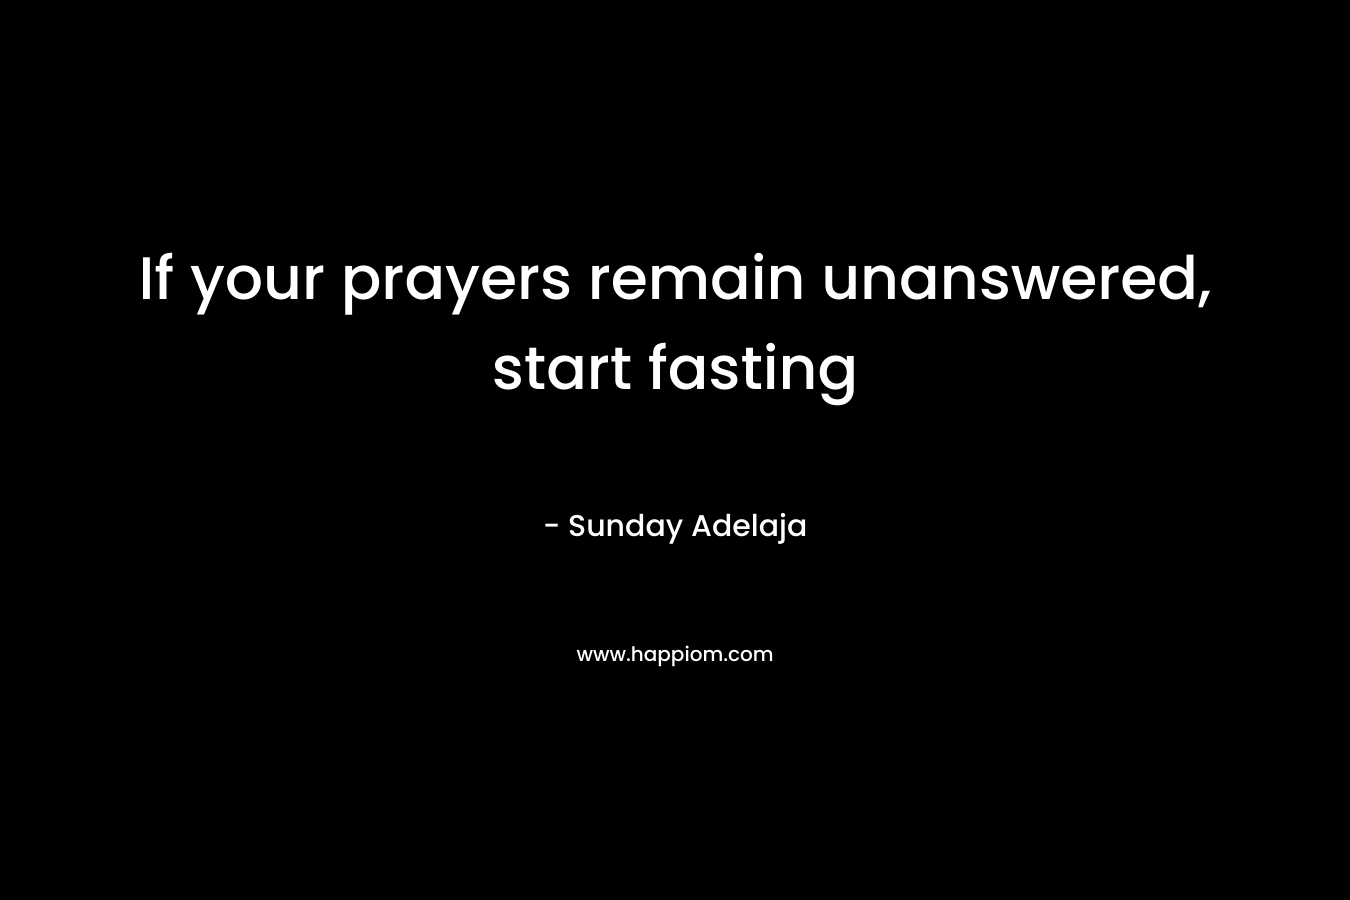 If your prayers remain unanswered, start fasting